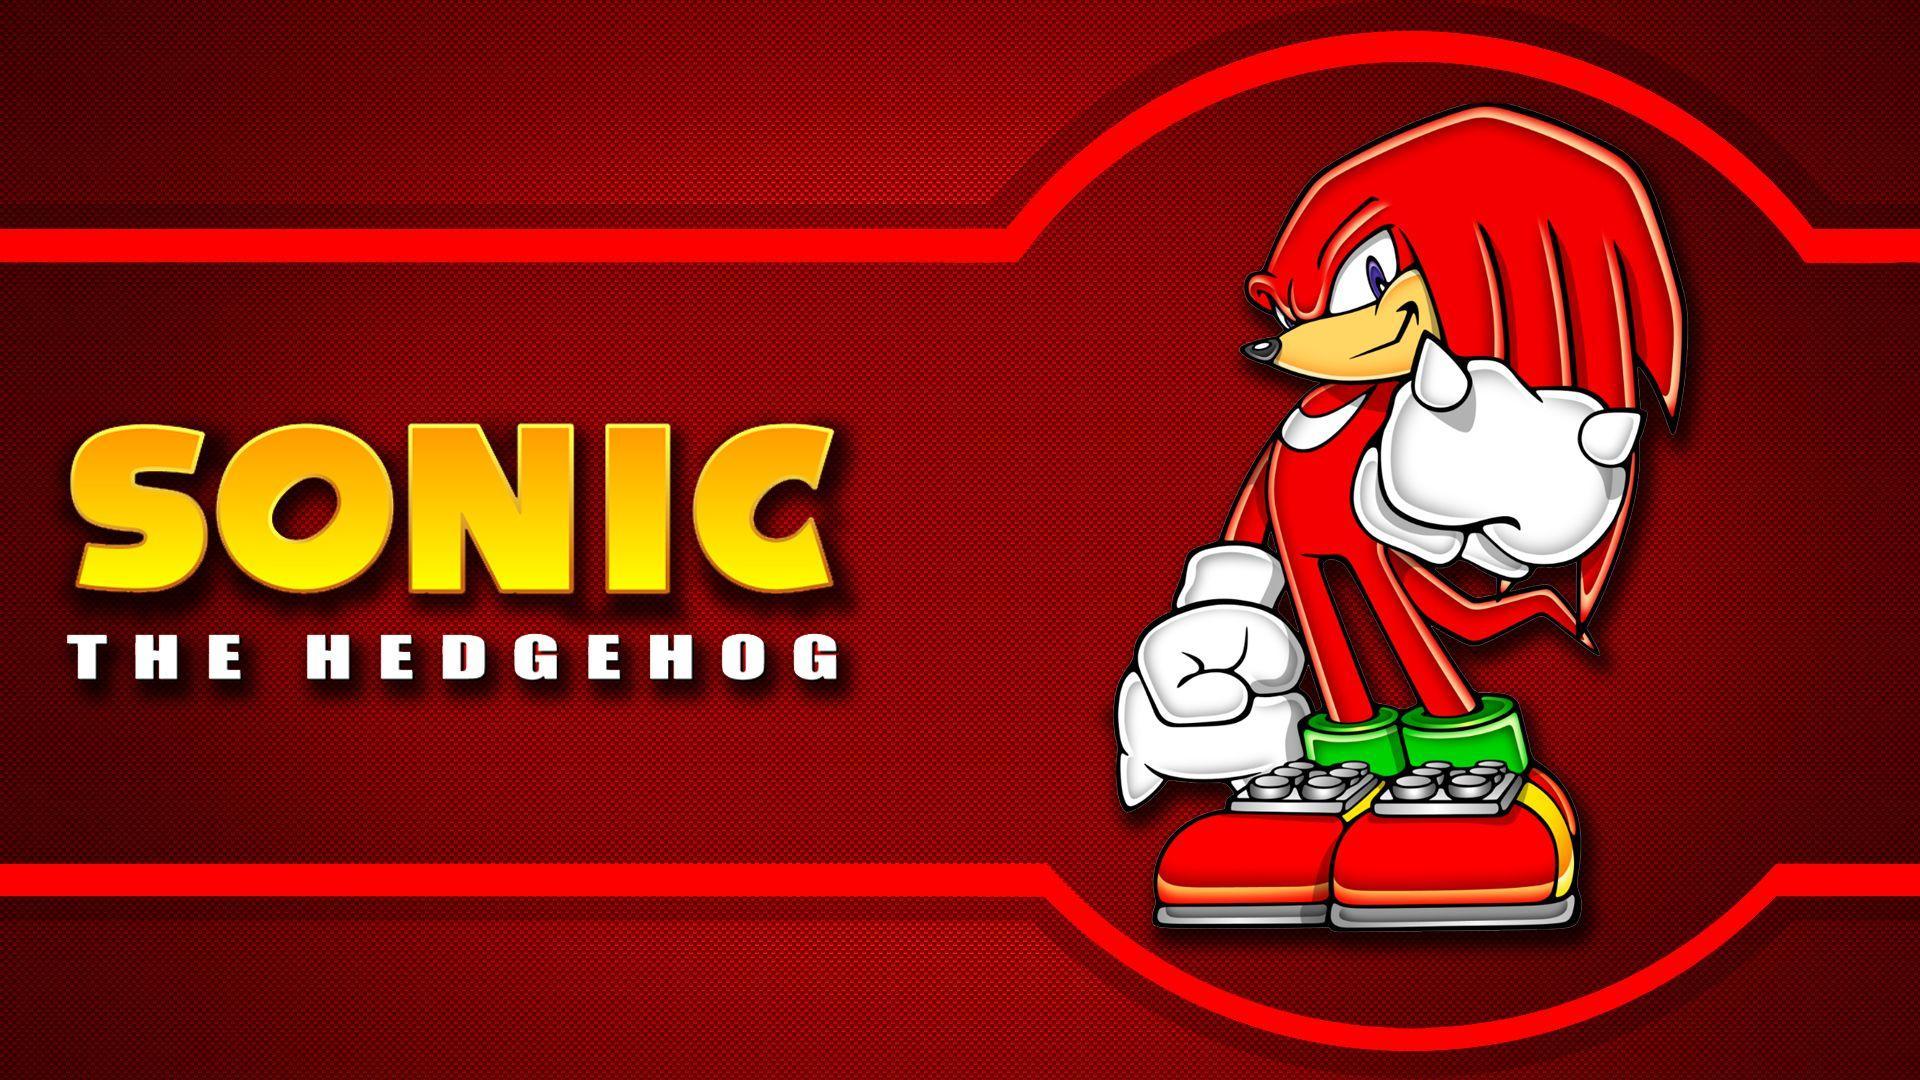 Video Game  Sonic the Hedgehog Miles Tails Prower Knuckles the Echidna  Wallpaper